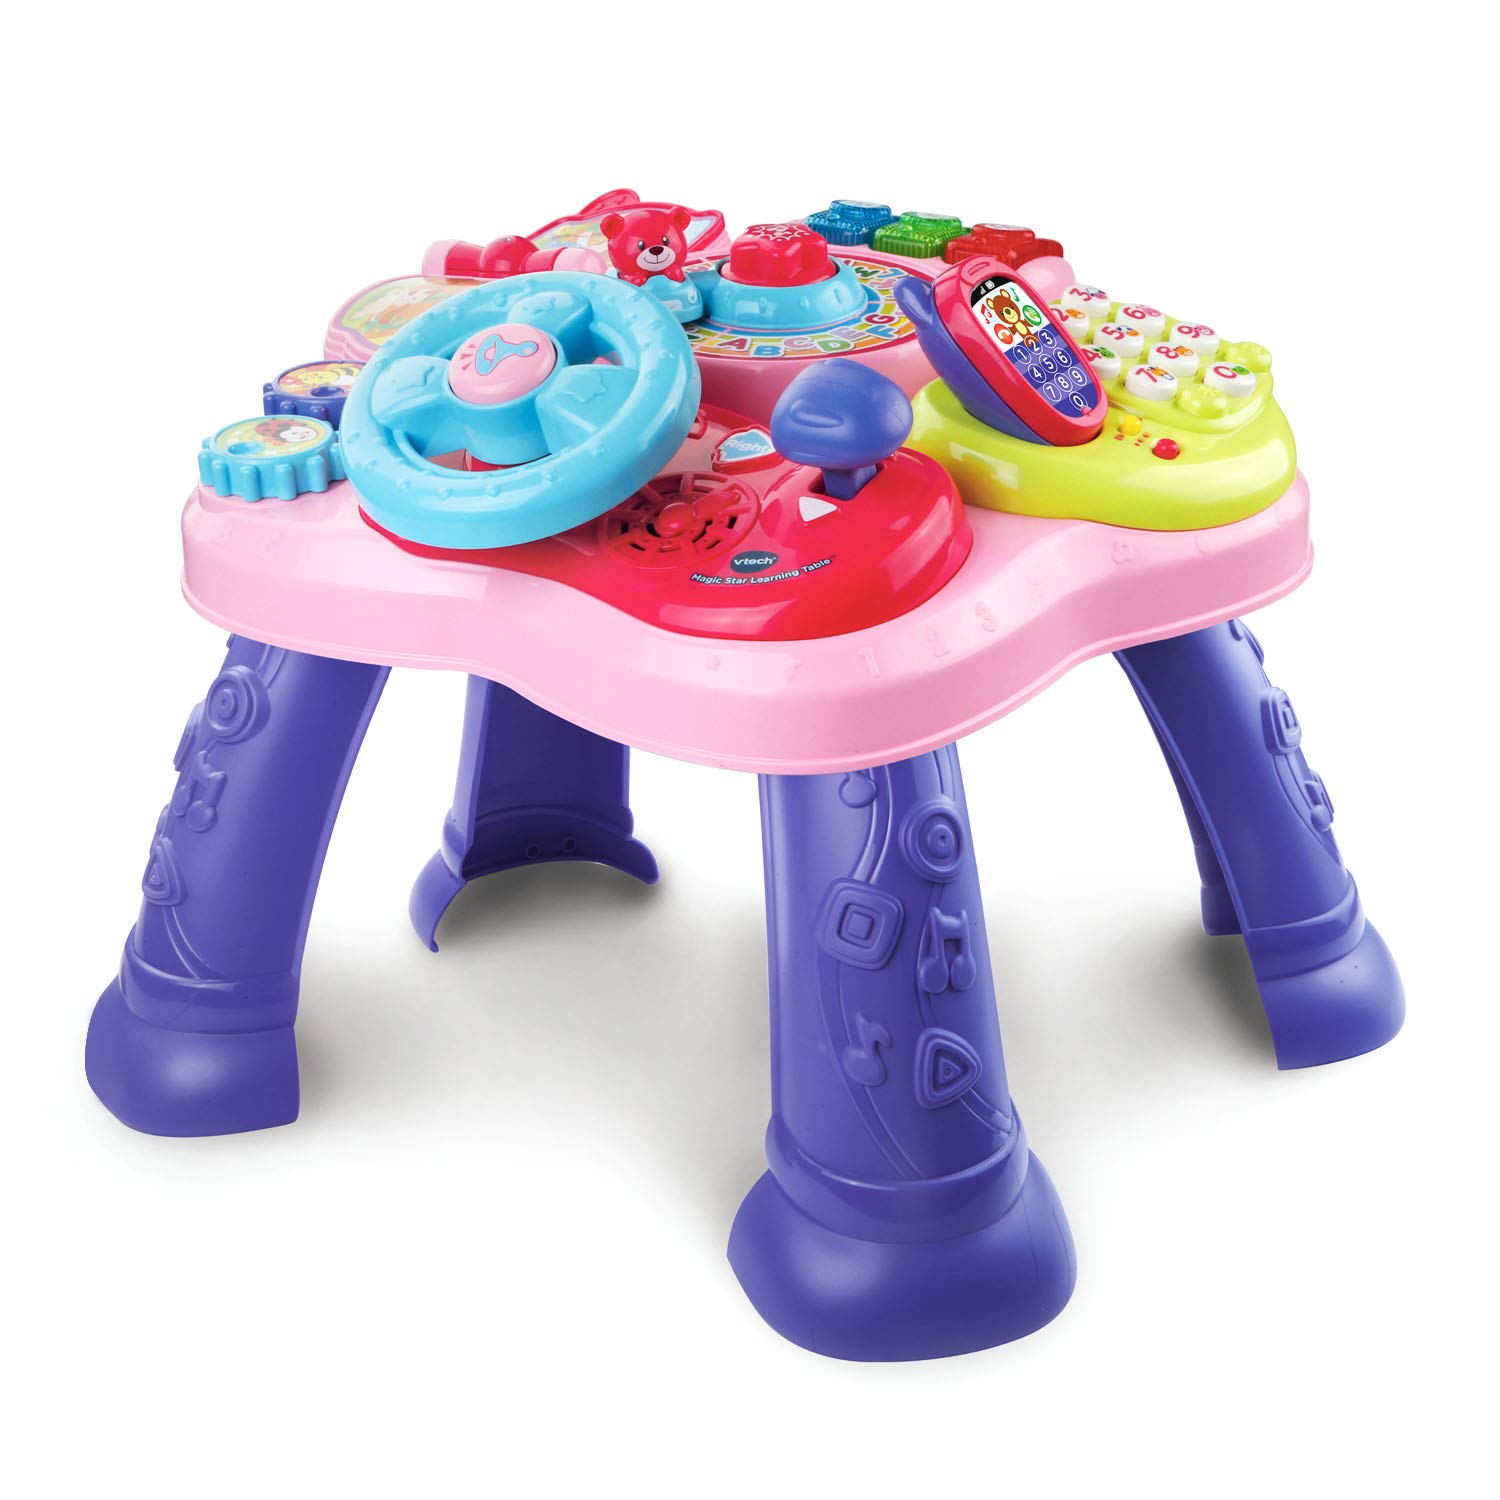 VTech Magic Star Learning Table, Pink